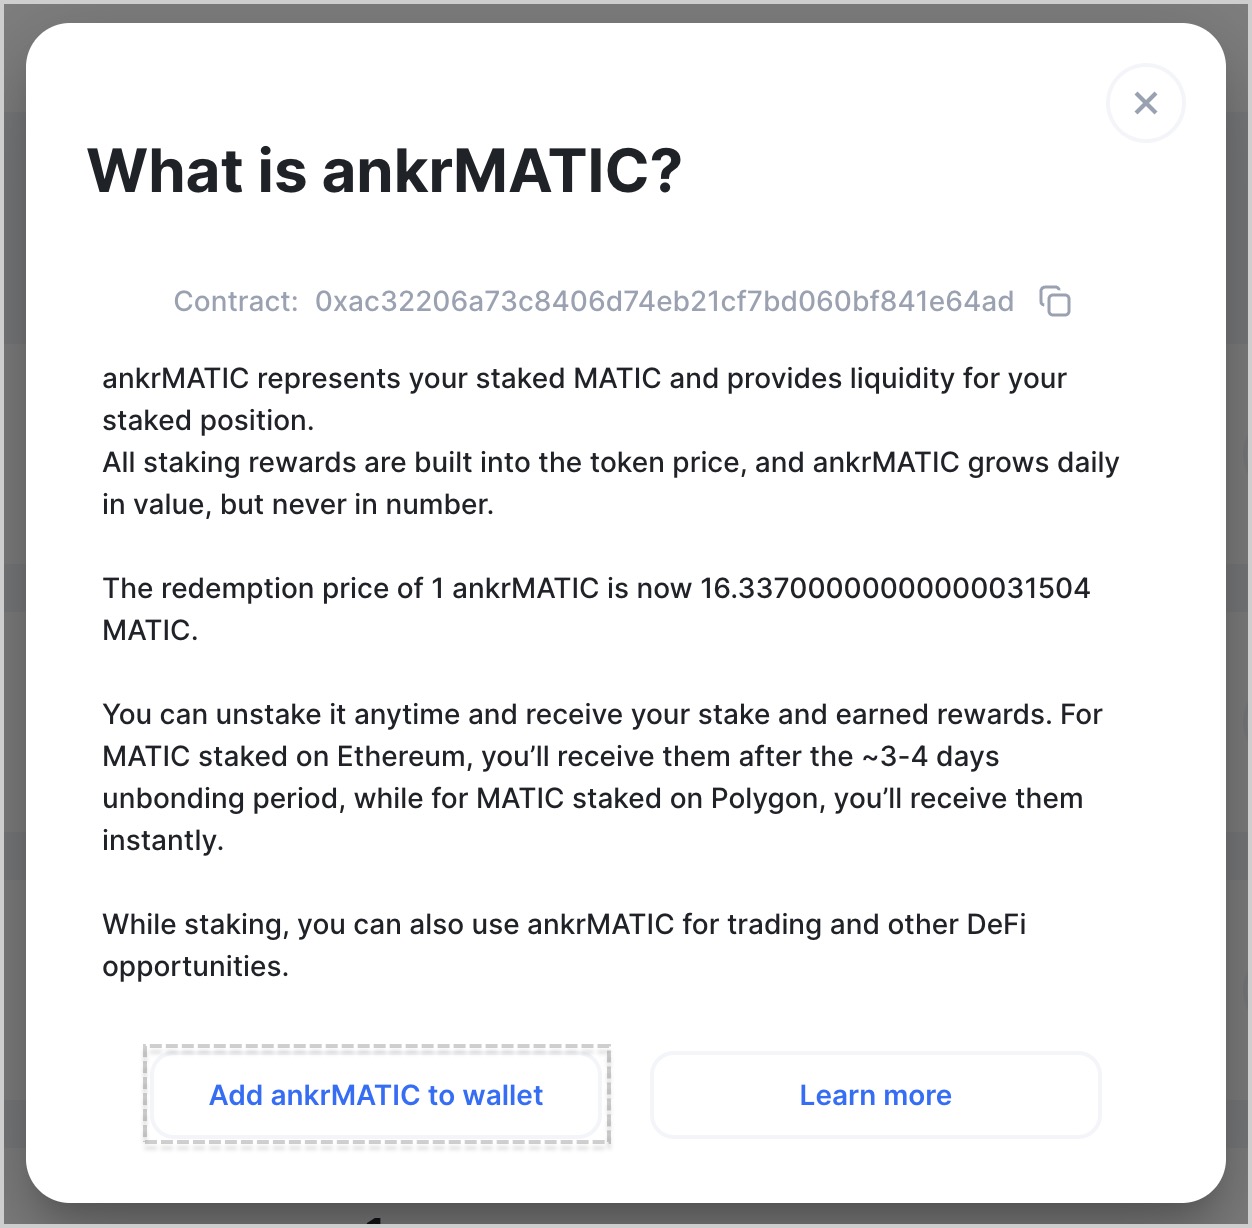 Click Add ankrMATIC to wallet